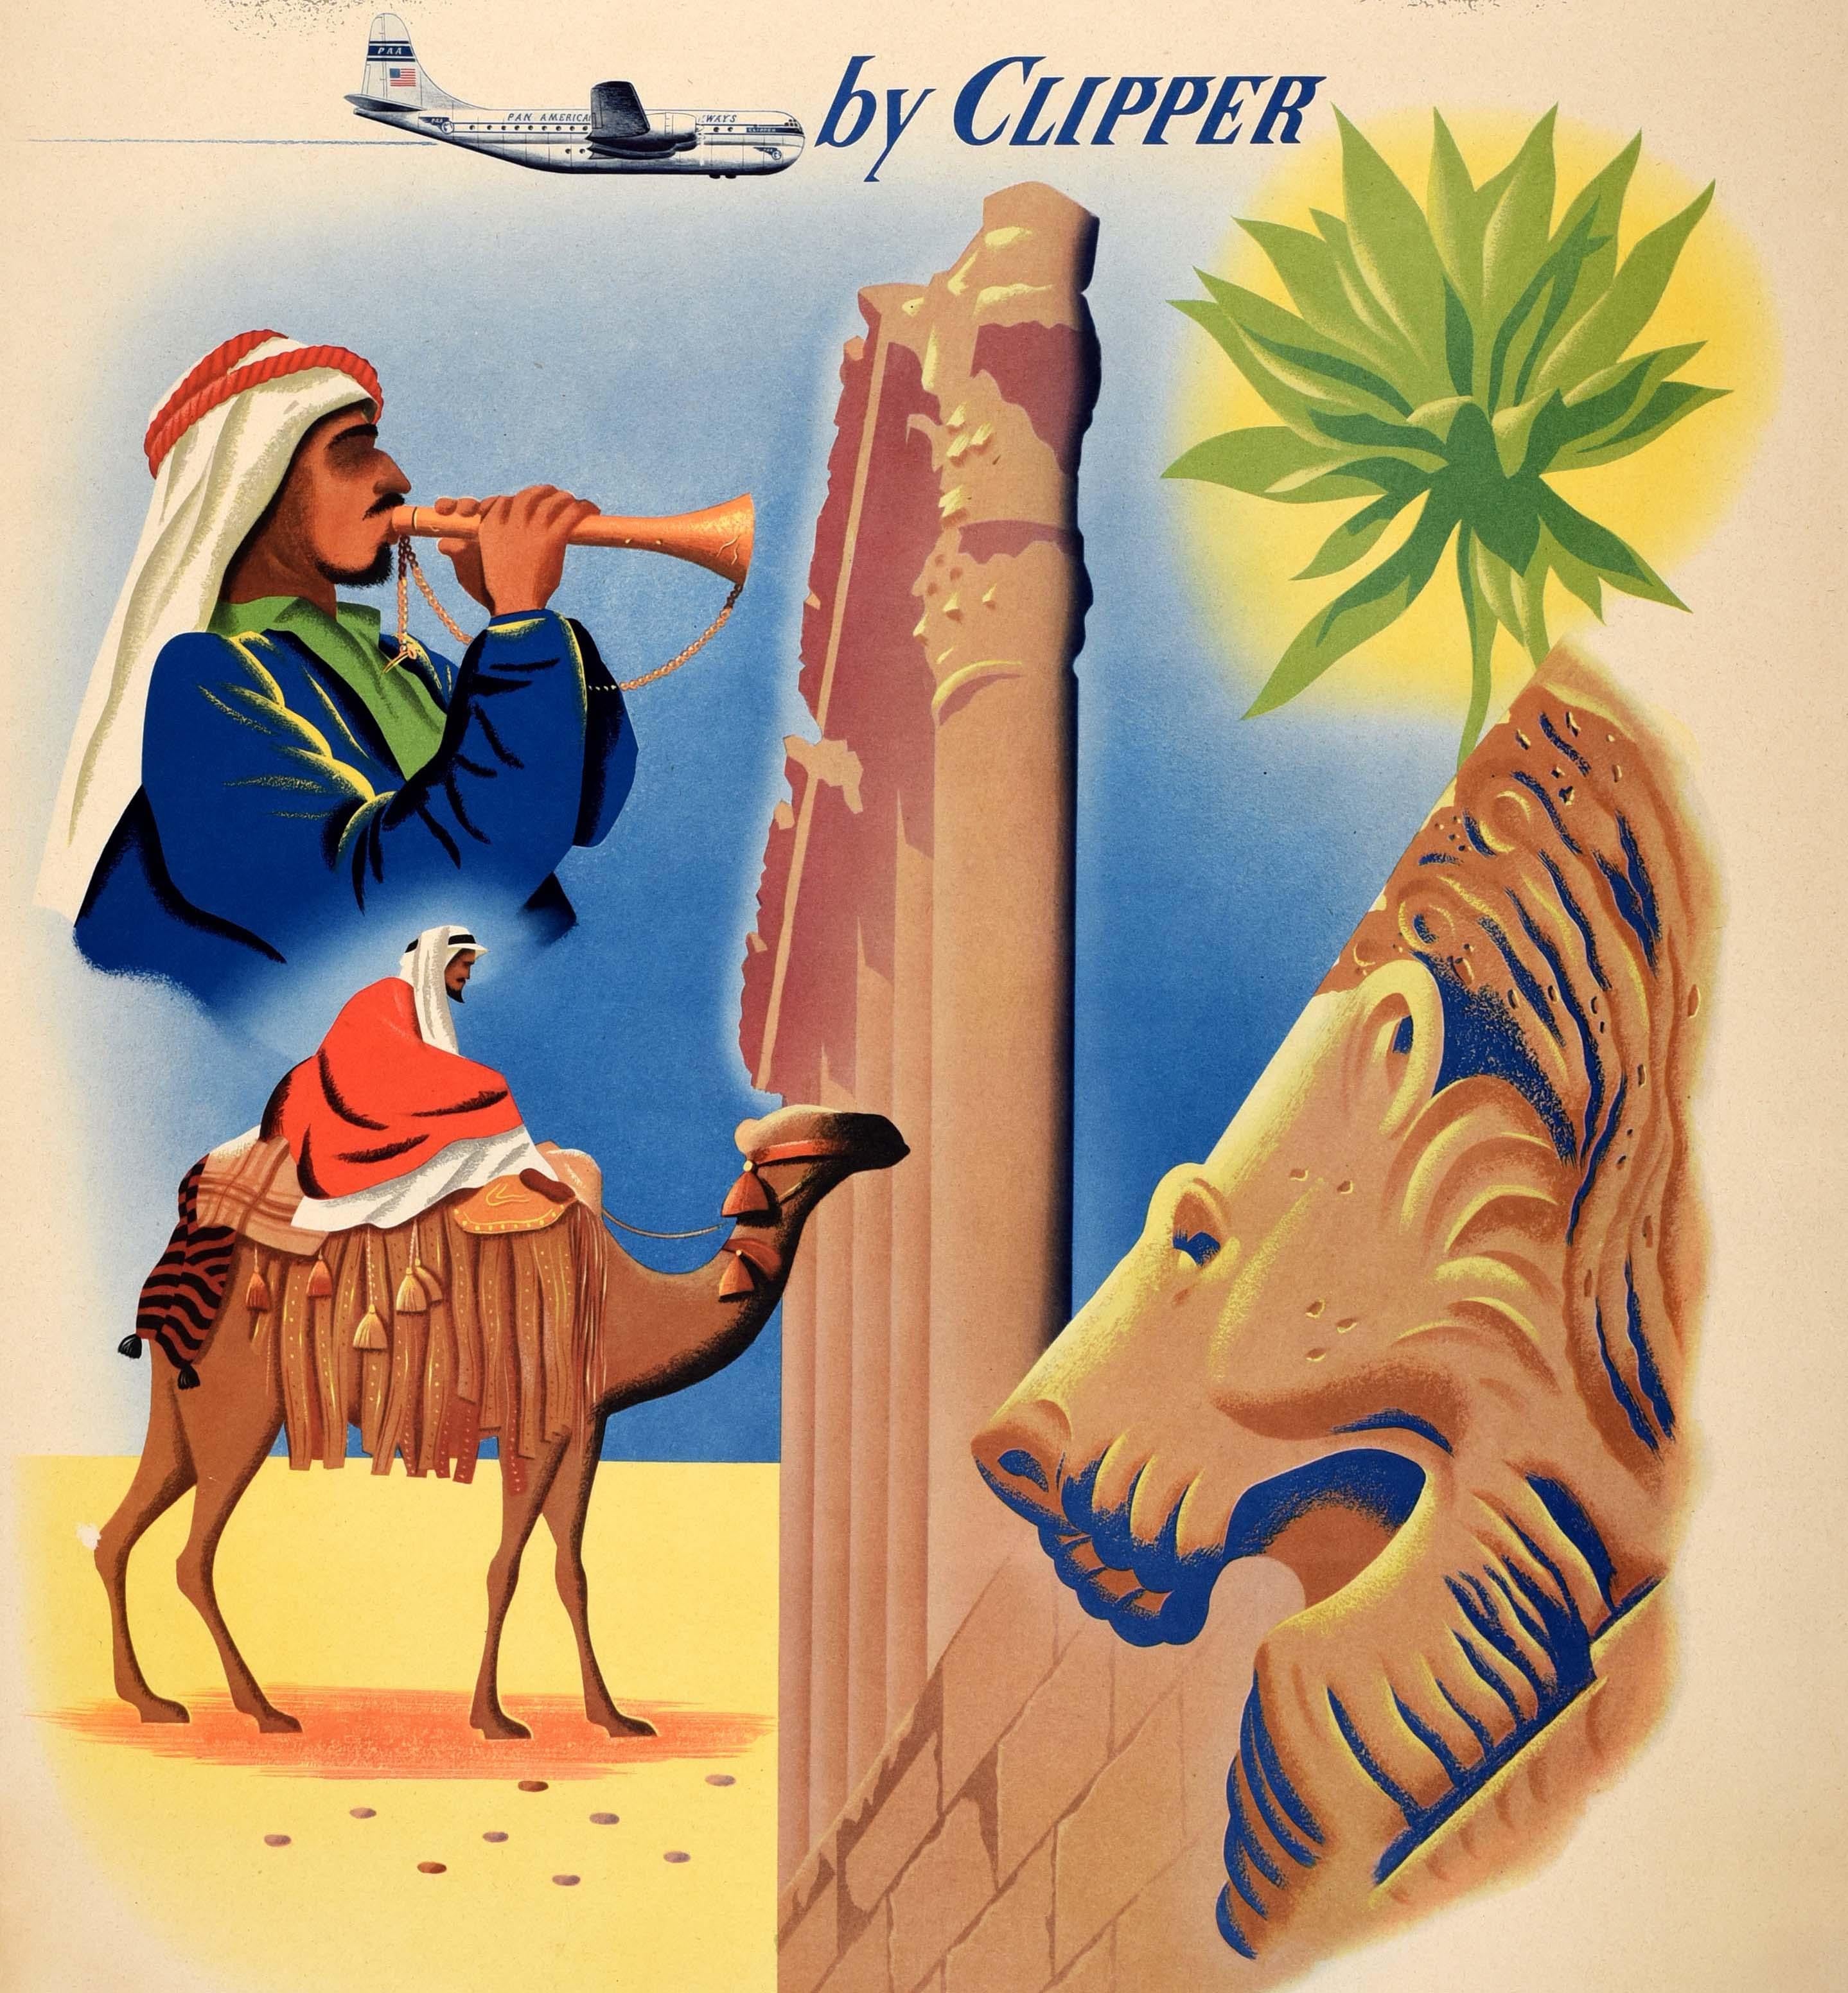 Original vintage travel poster - Gateway to the Middle East and the Holy Land Beirut Lebanon by Clipper Pan American World Airways World's Most Experienced Airline - featuring illustrations of ancient architecture pillars and wall, a stone head of a